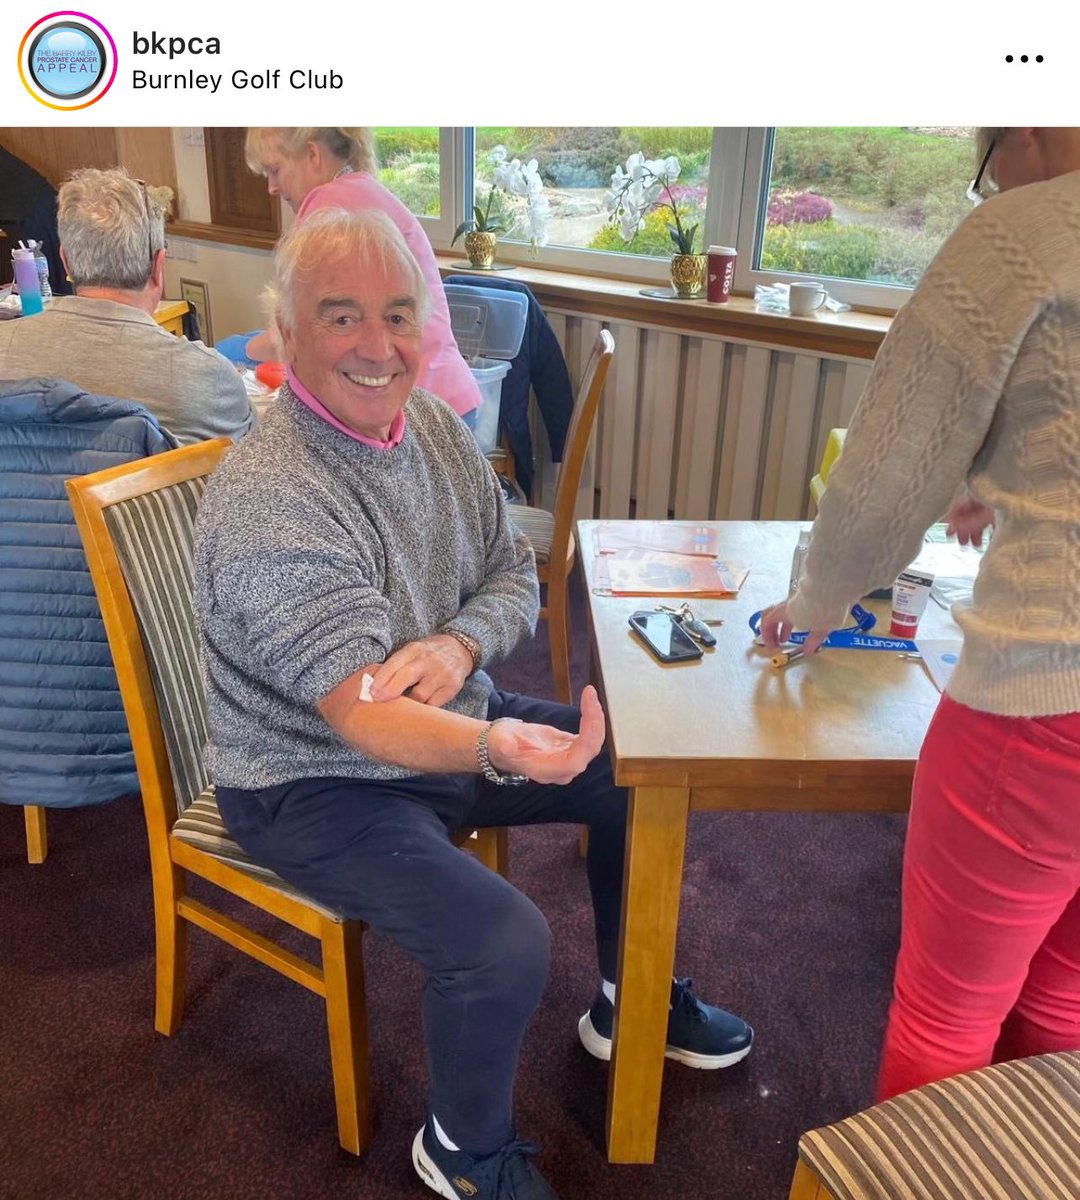 🙌🏽 Good to see Stan looking well and getting himself checked out at the latest @BKPCAppeal event this weekend #twitterclarets